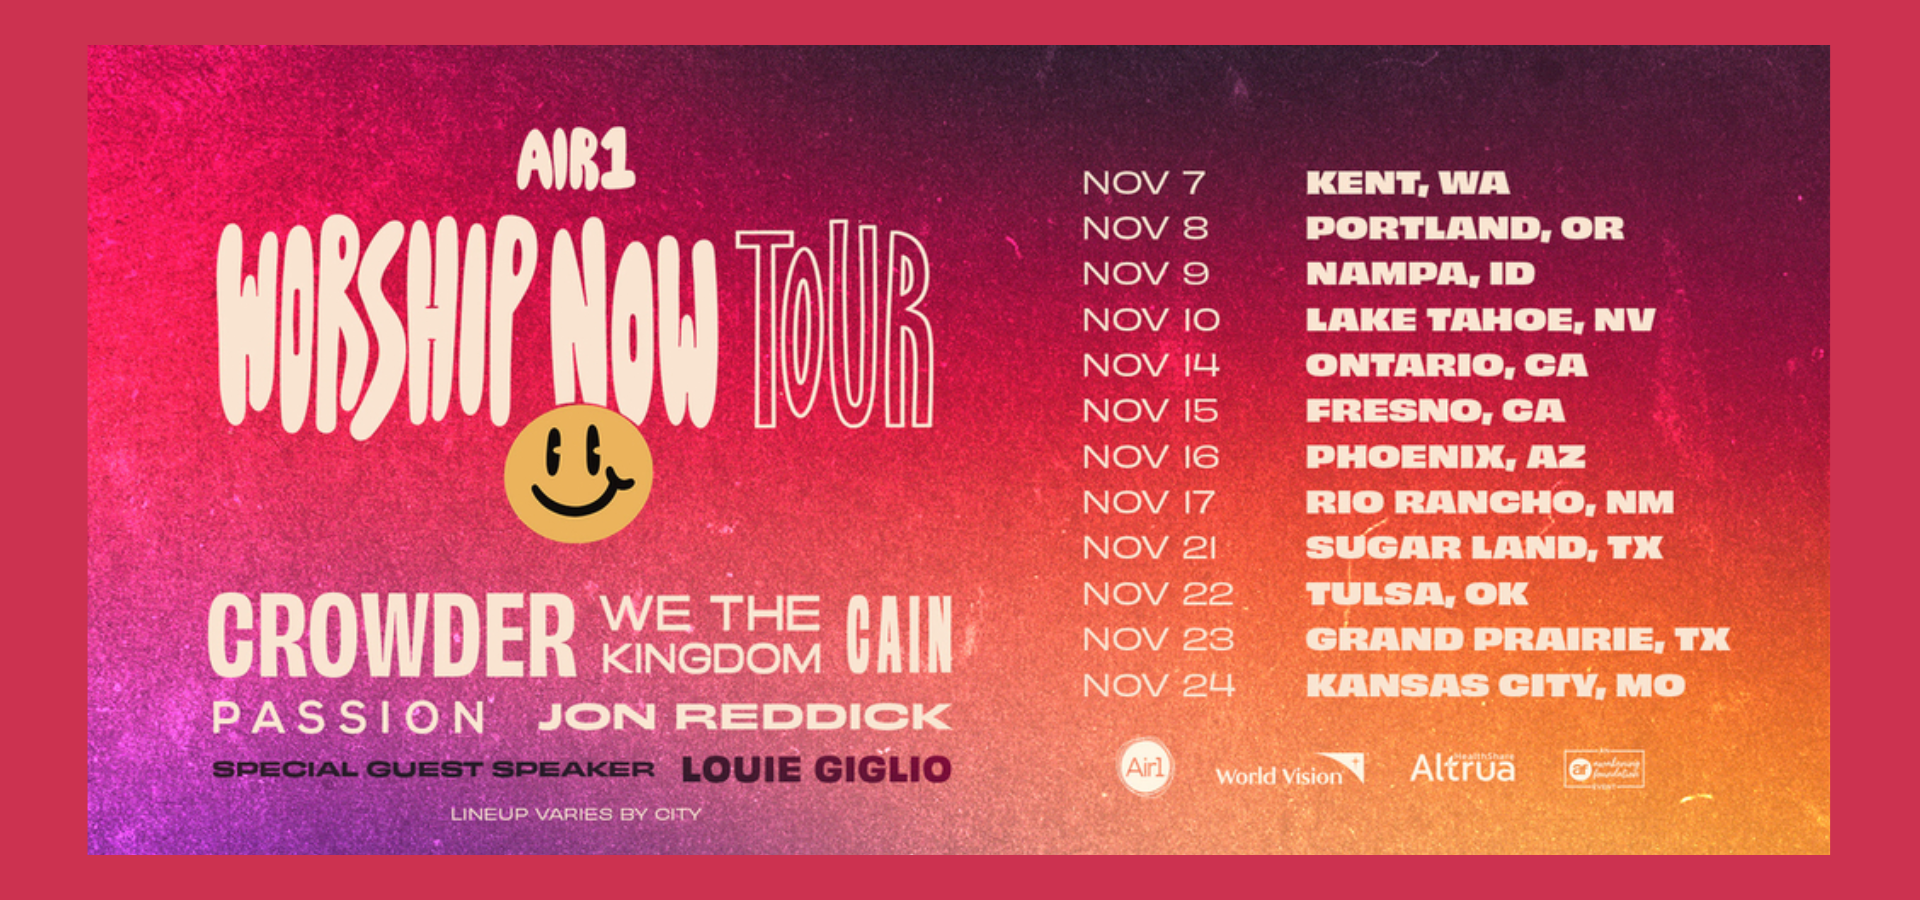 Air1 Worship Now Tour Coming This Fall